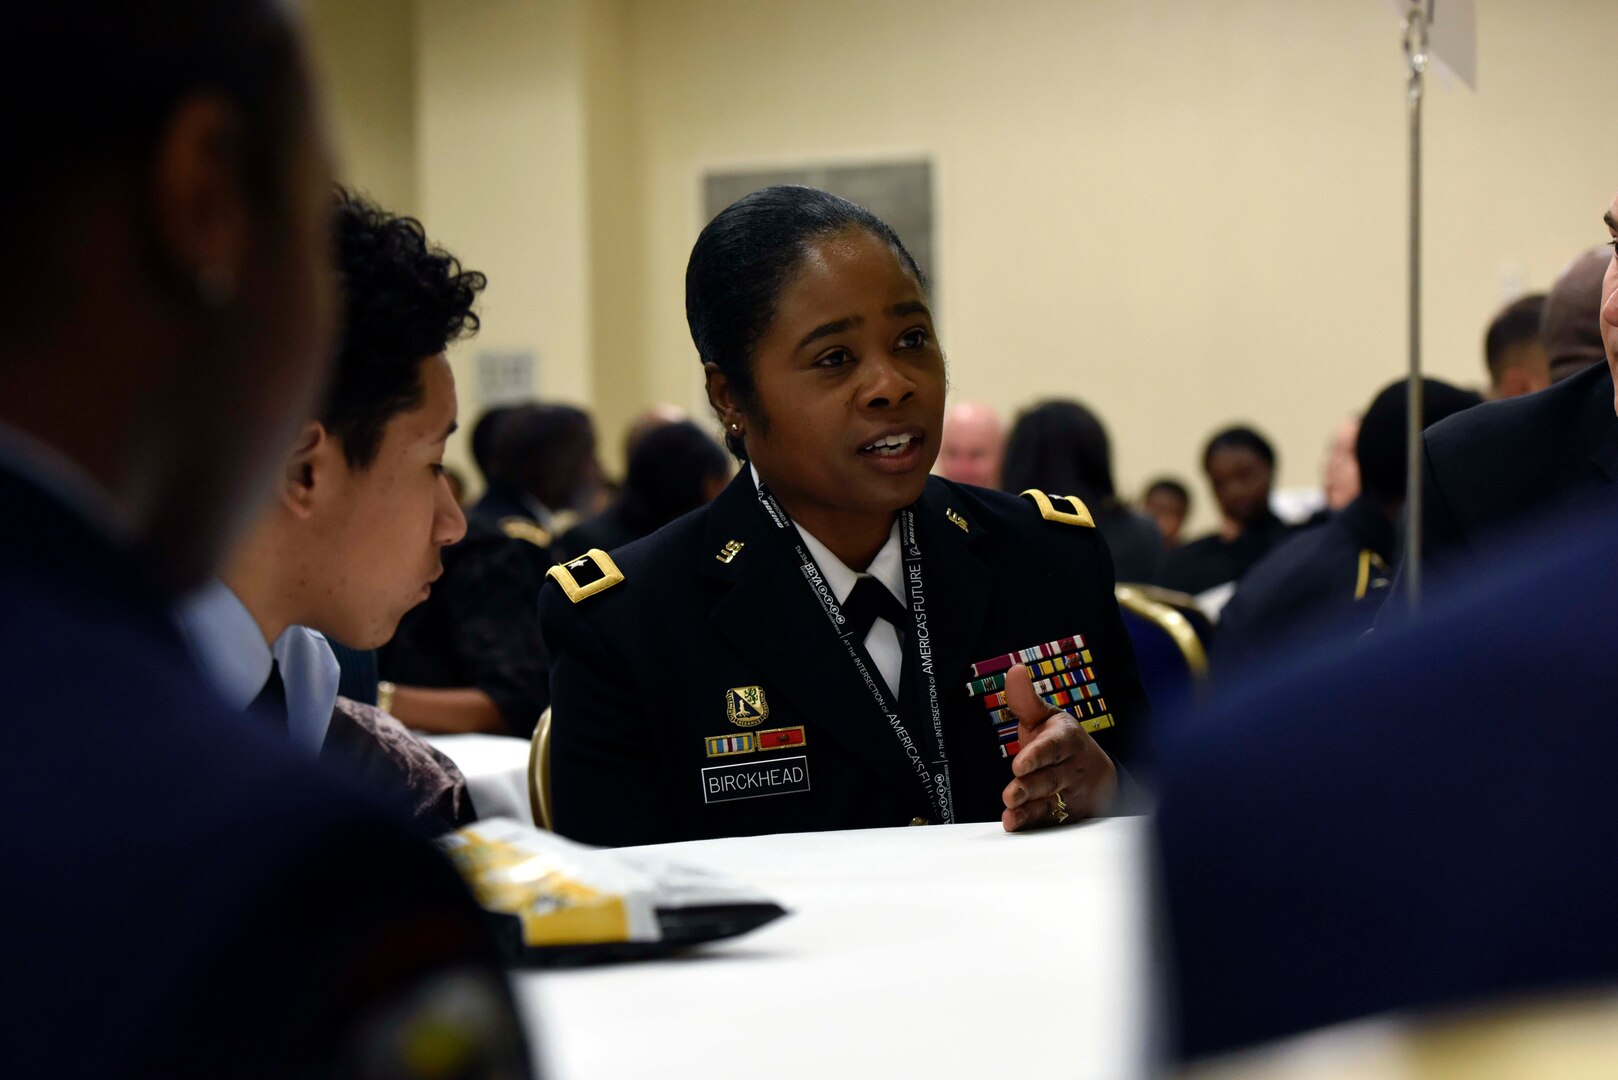 Army Brig. Gen. Janeen Birckhead, the Maryland National Guard's assistant adjutant general for Army, illustrates a point to high school and college students during a mentoring session that was part of the annual Black Engineer of the Year Awards, Science, Technology, Engineering and Mathematics, Global Competitiveness Conference, held recently in Washington, D.C.